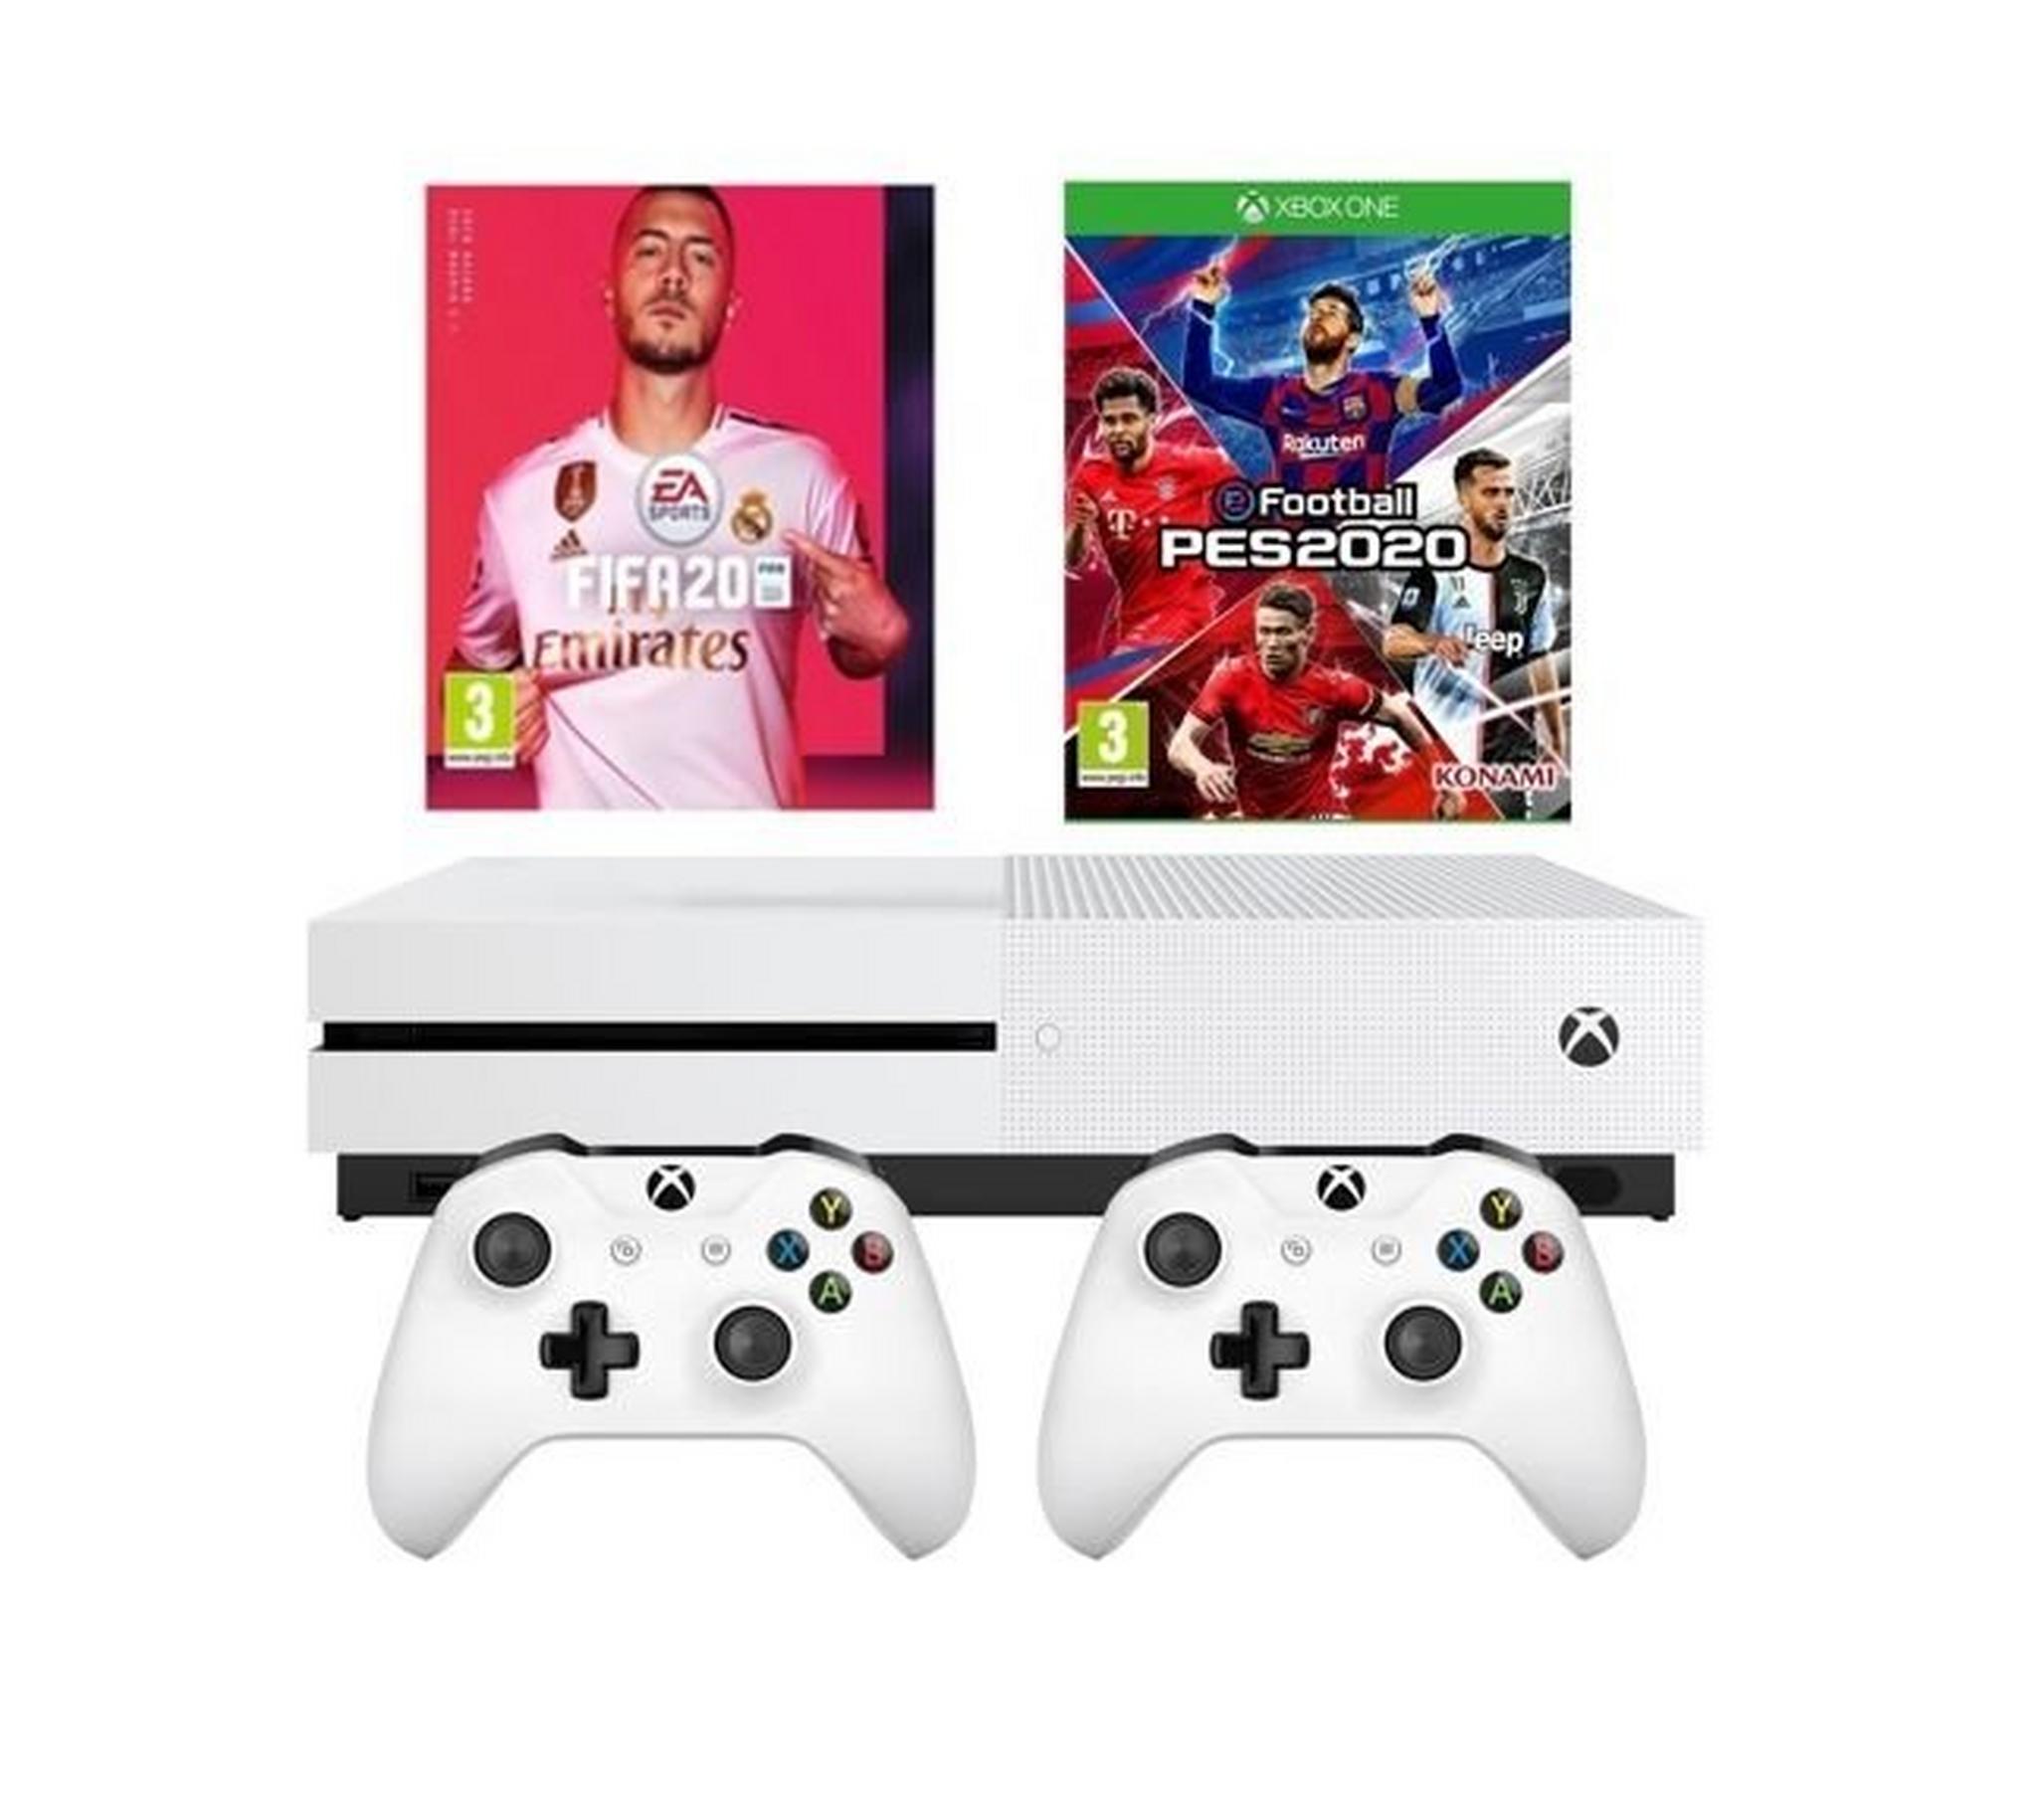 Xbox One S Console + 2 Controller + FIFA 20 + PES20